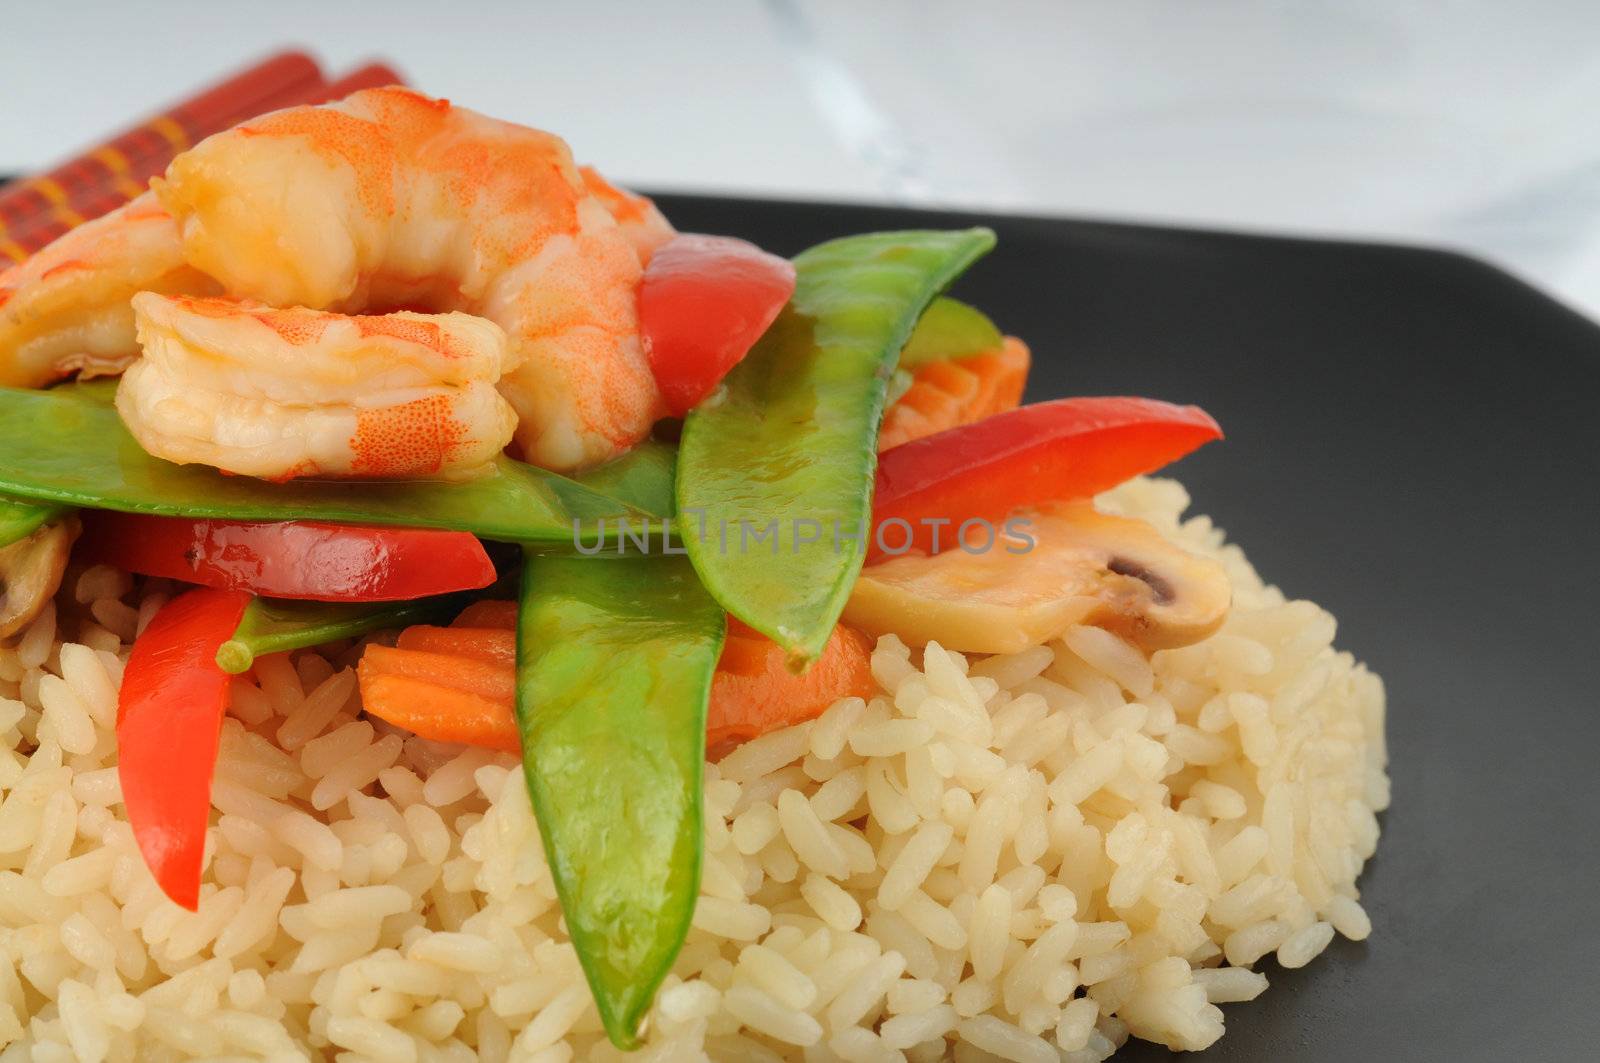 Stirfry of shrimp and vegetables on white rice.